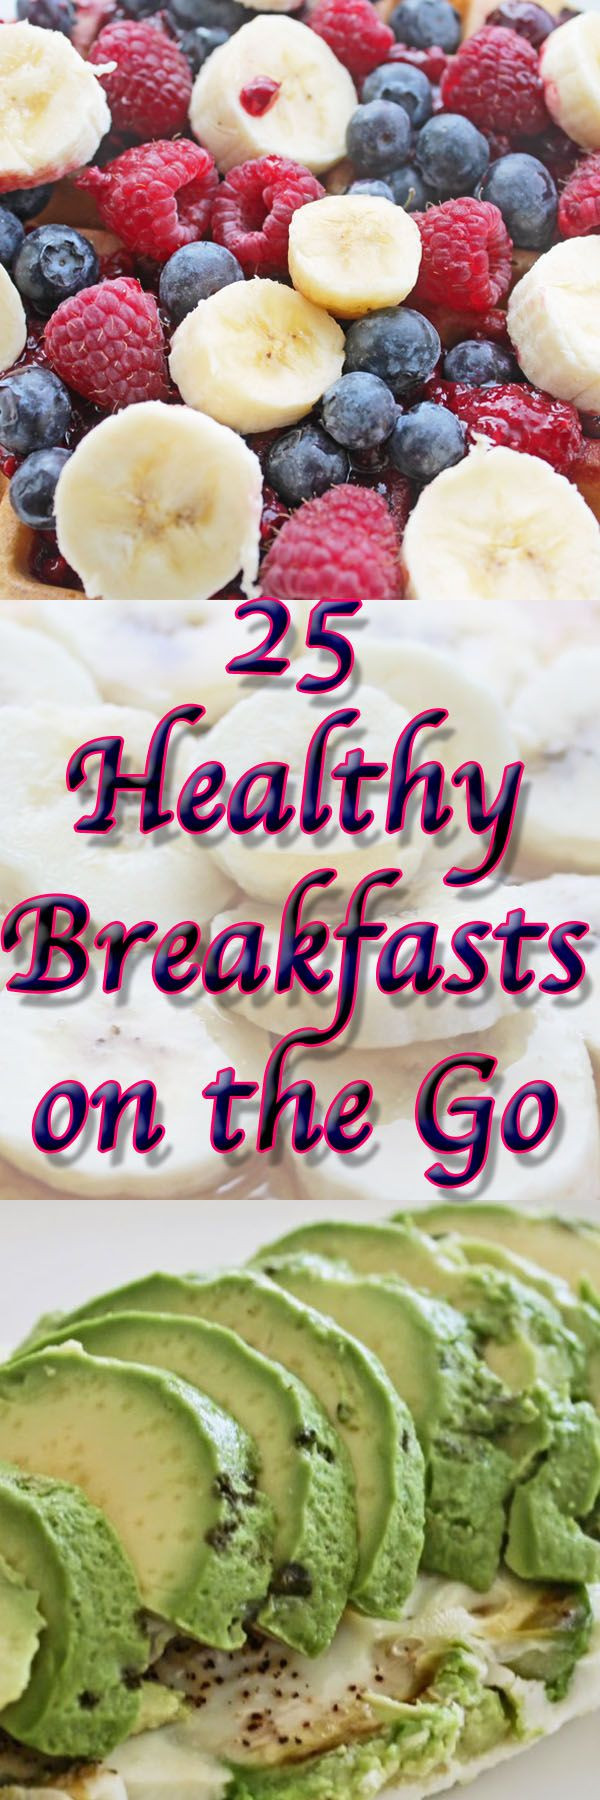 Healthy Breakfast On The Go Recipes
 25 healthy breakfasts on the go